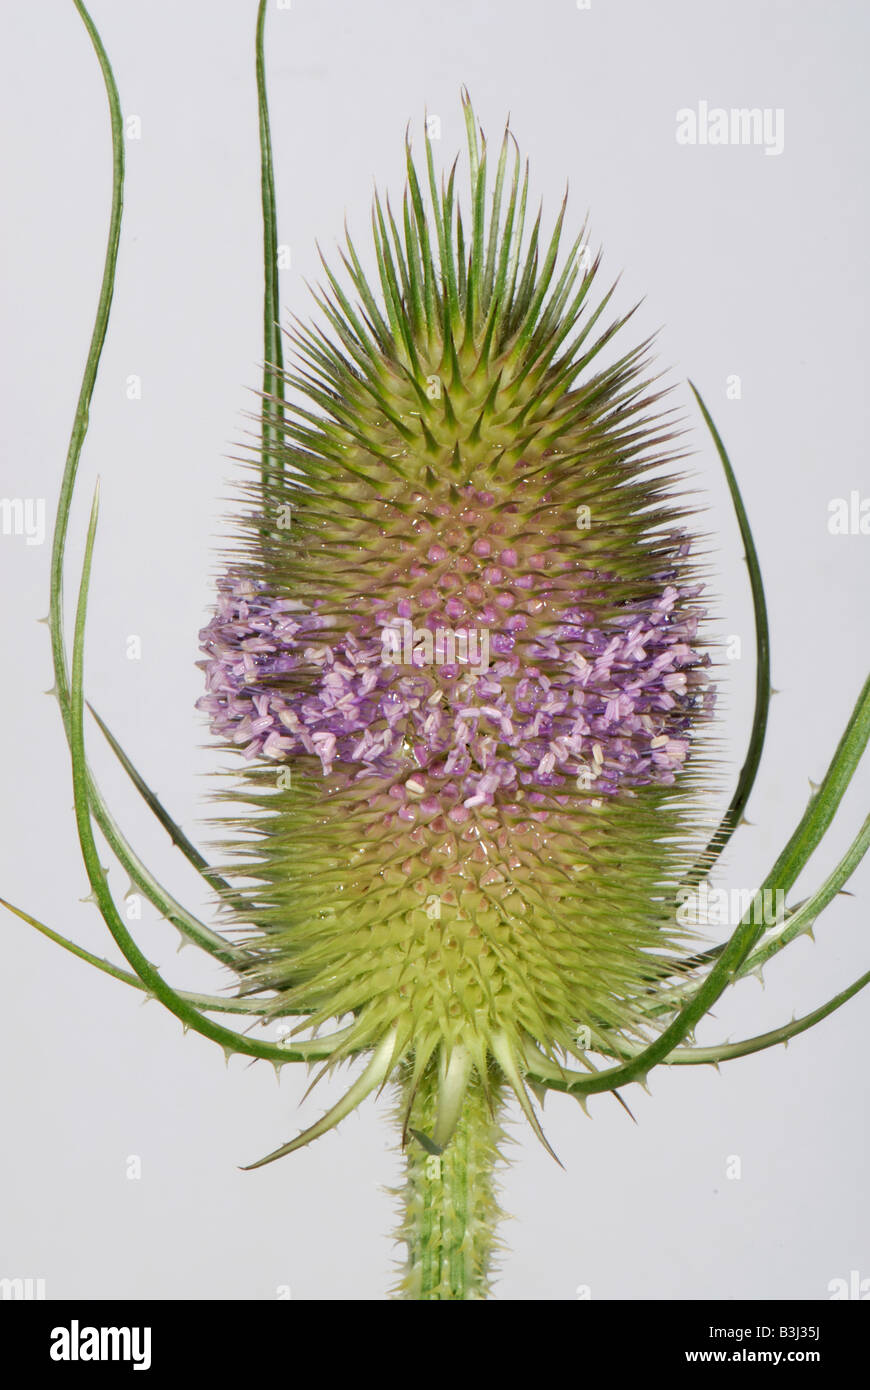 Teasel Dipsacus fullonum with a single whorl of open flowers on spiny flowerhead Stock Photo